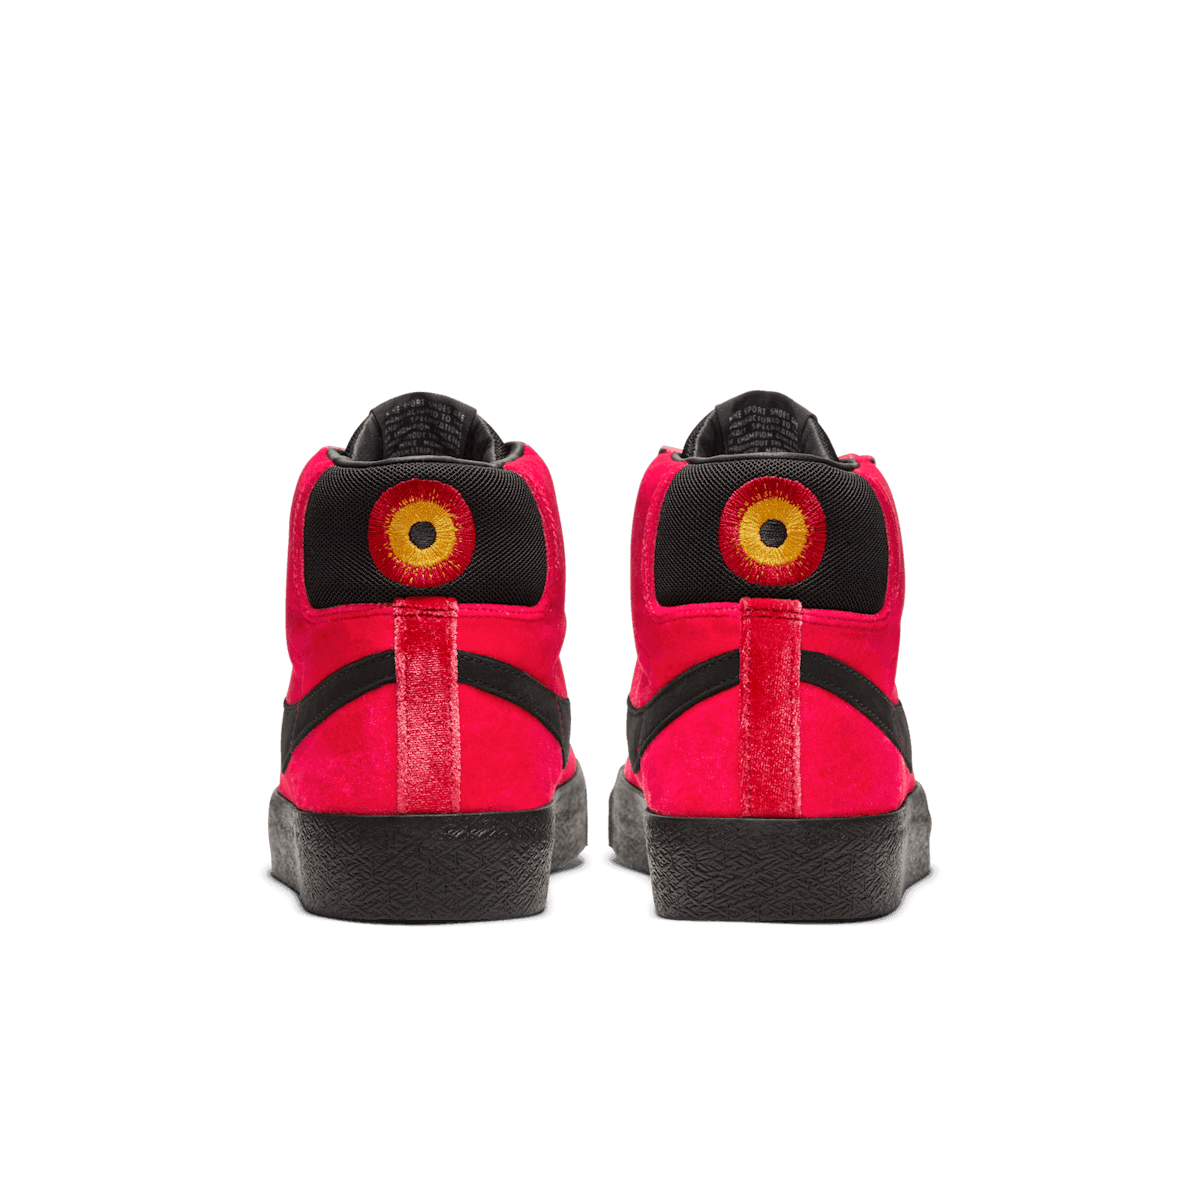 Nike SB Zoom Blazer Mid Kevin and Hell "Hell" Angle 3